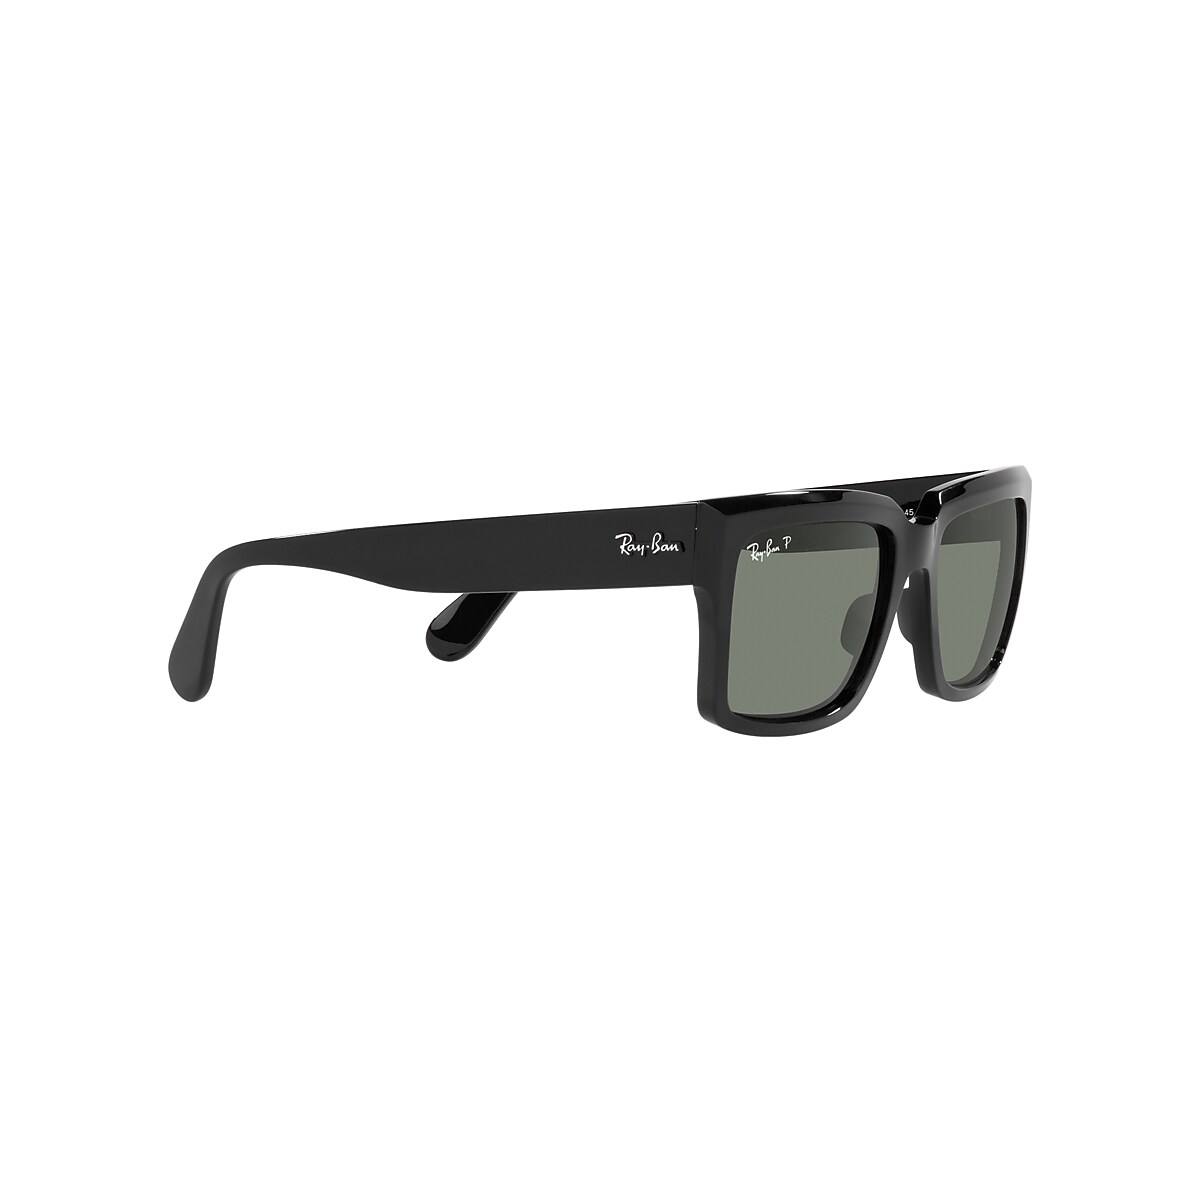 INVERNESS Sunglasses in Black and Green - RB2191F